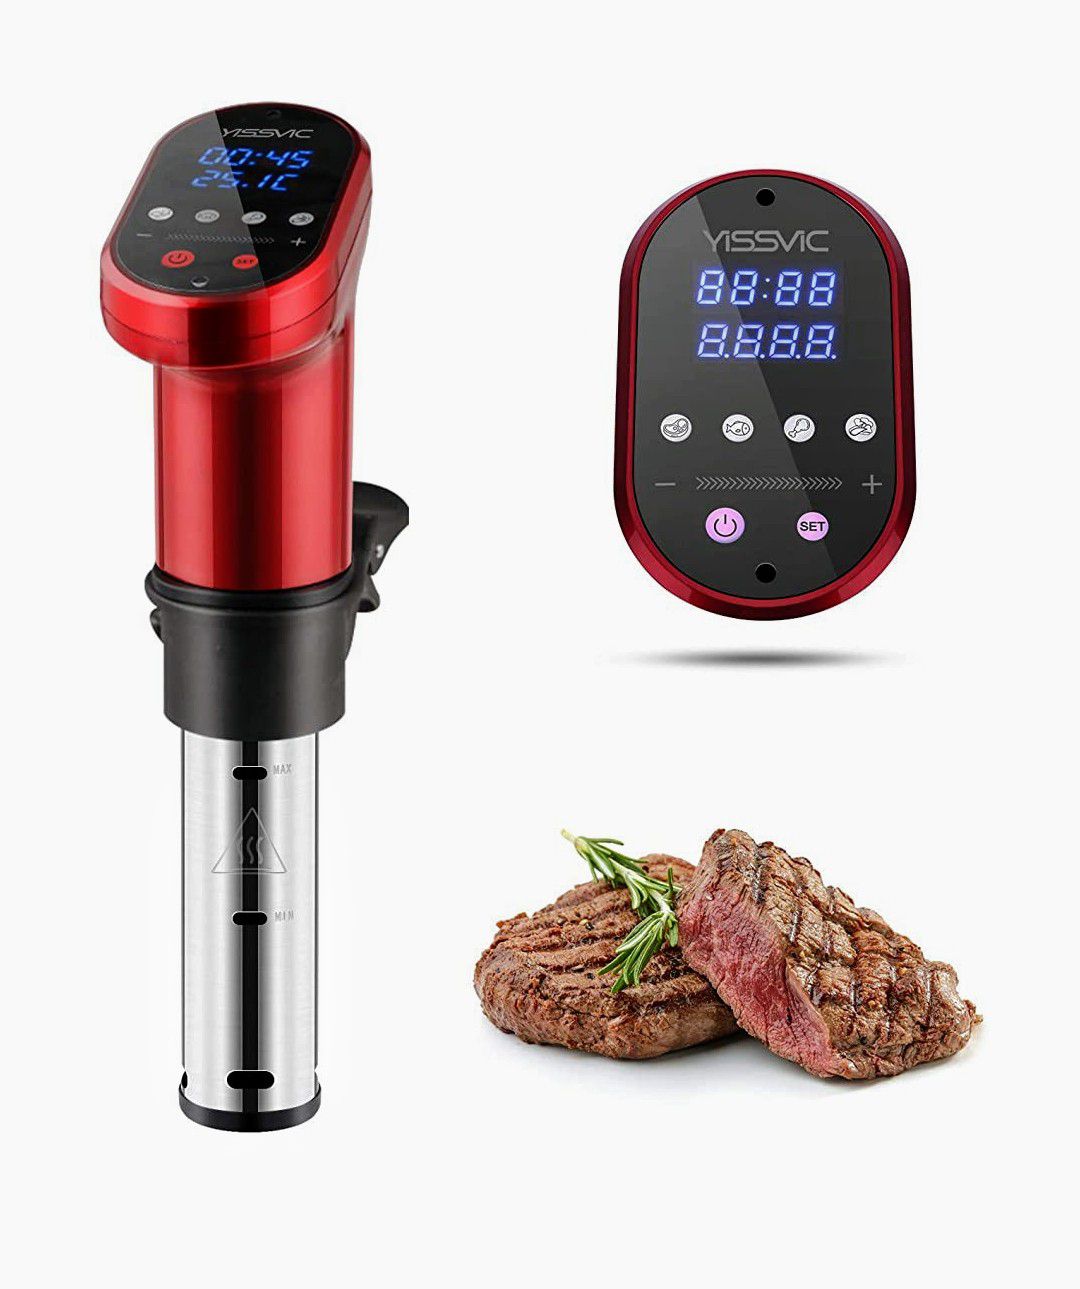 YISSVIC Sous Vide Cooker 1000W Immersion Circulator Sous Vide Vacuum Heater Accurate Temperature Digital Timer Ultra Quiet Working Cooker Red